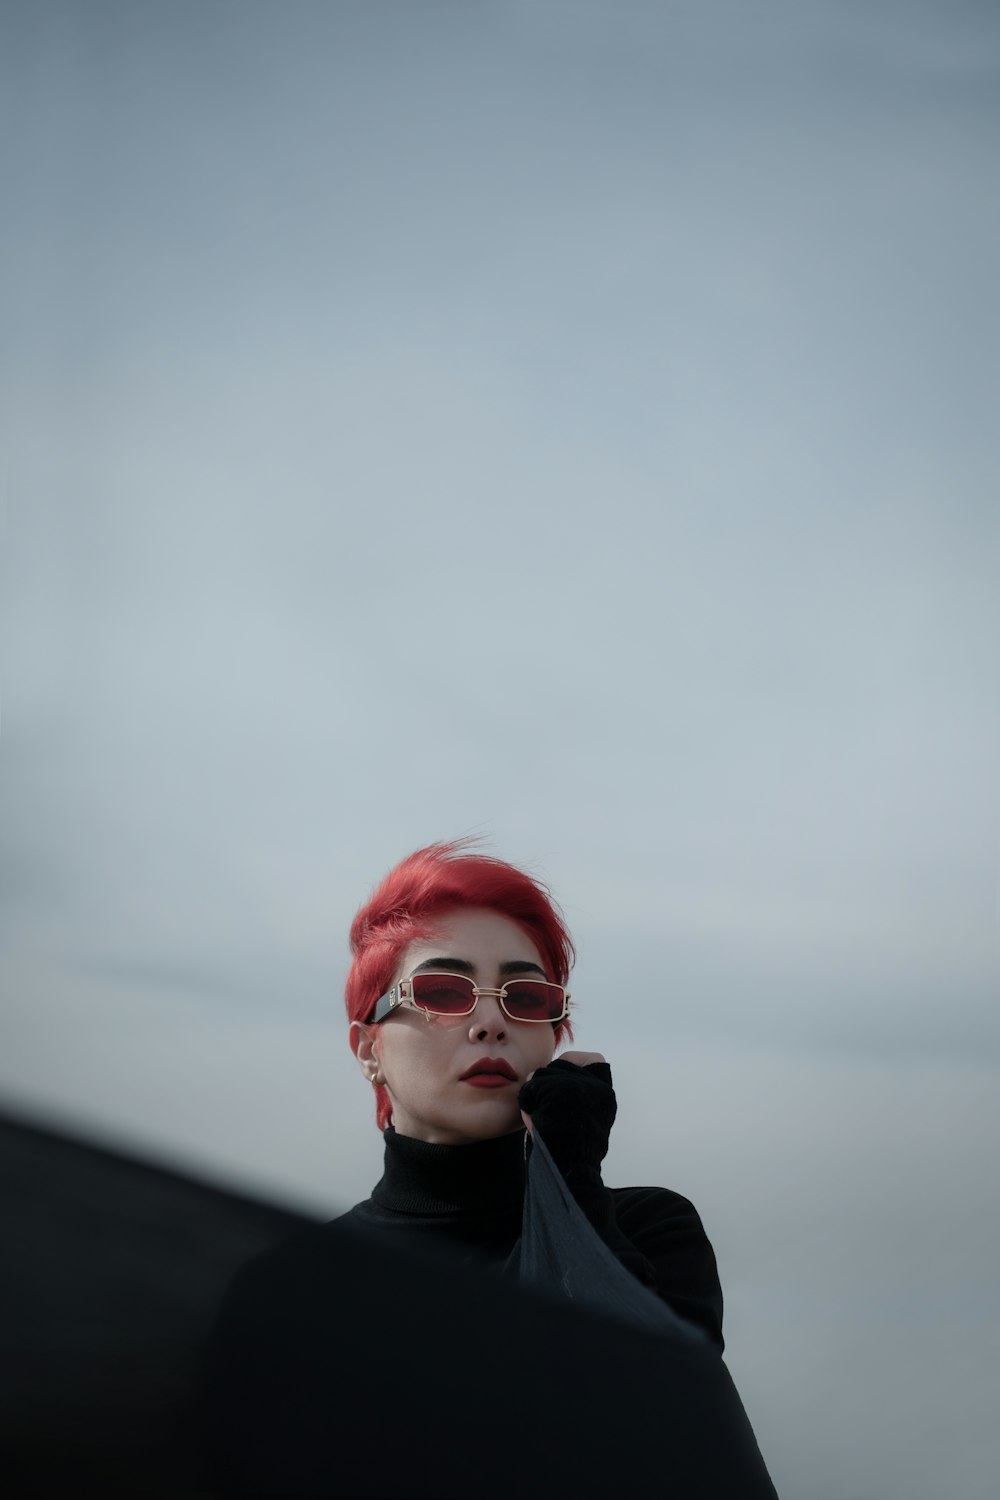 a woman with red hair wearing sunglasses and a black top